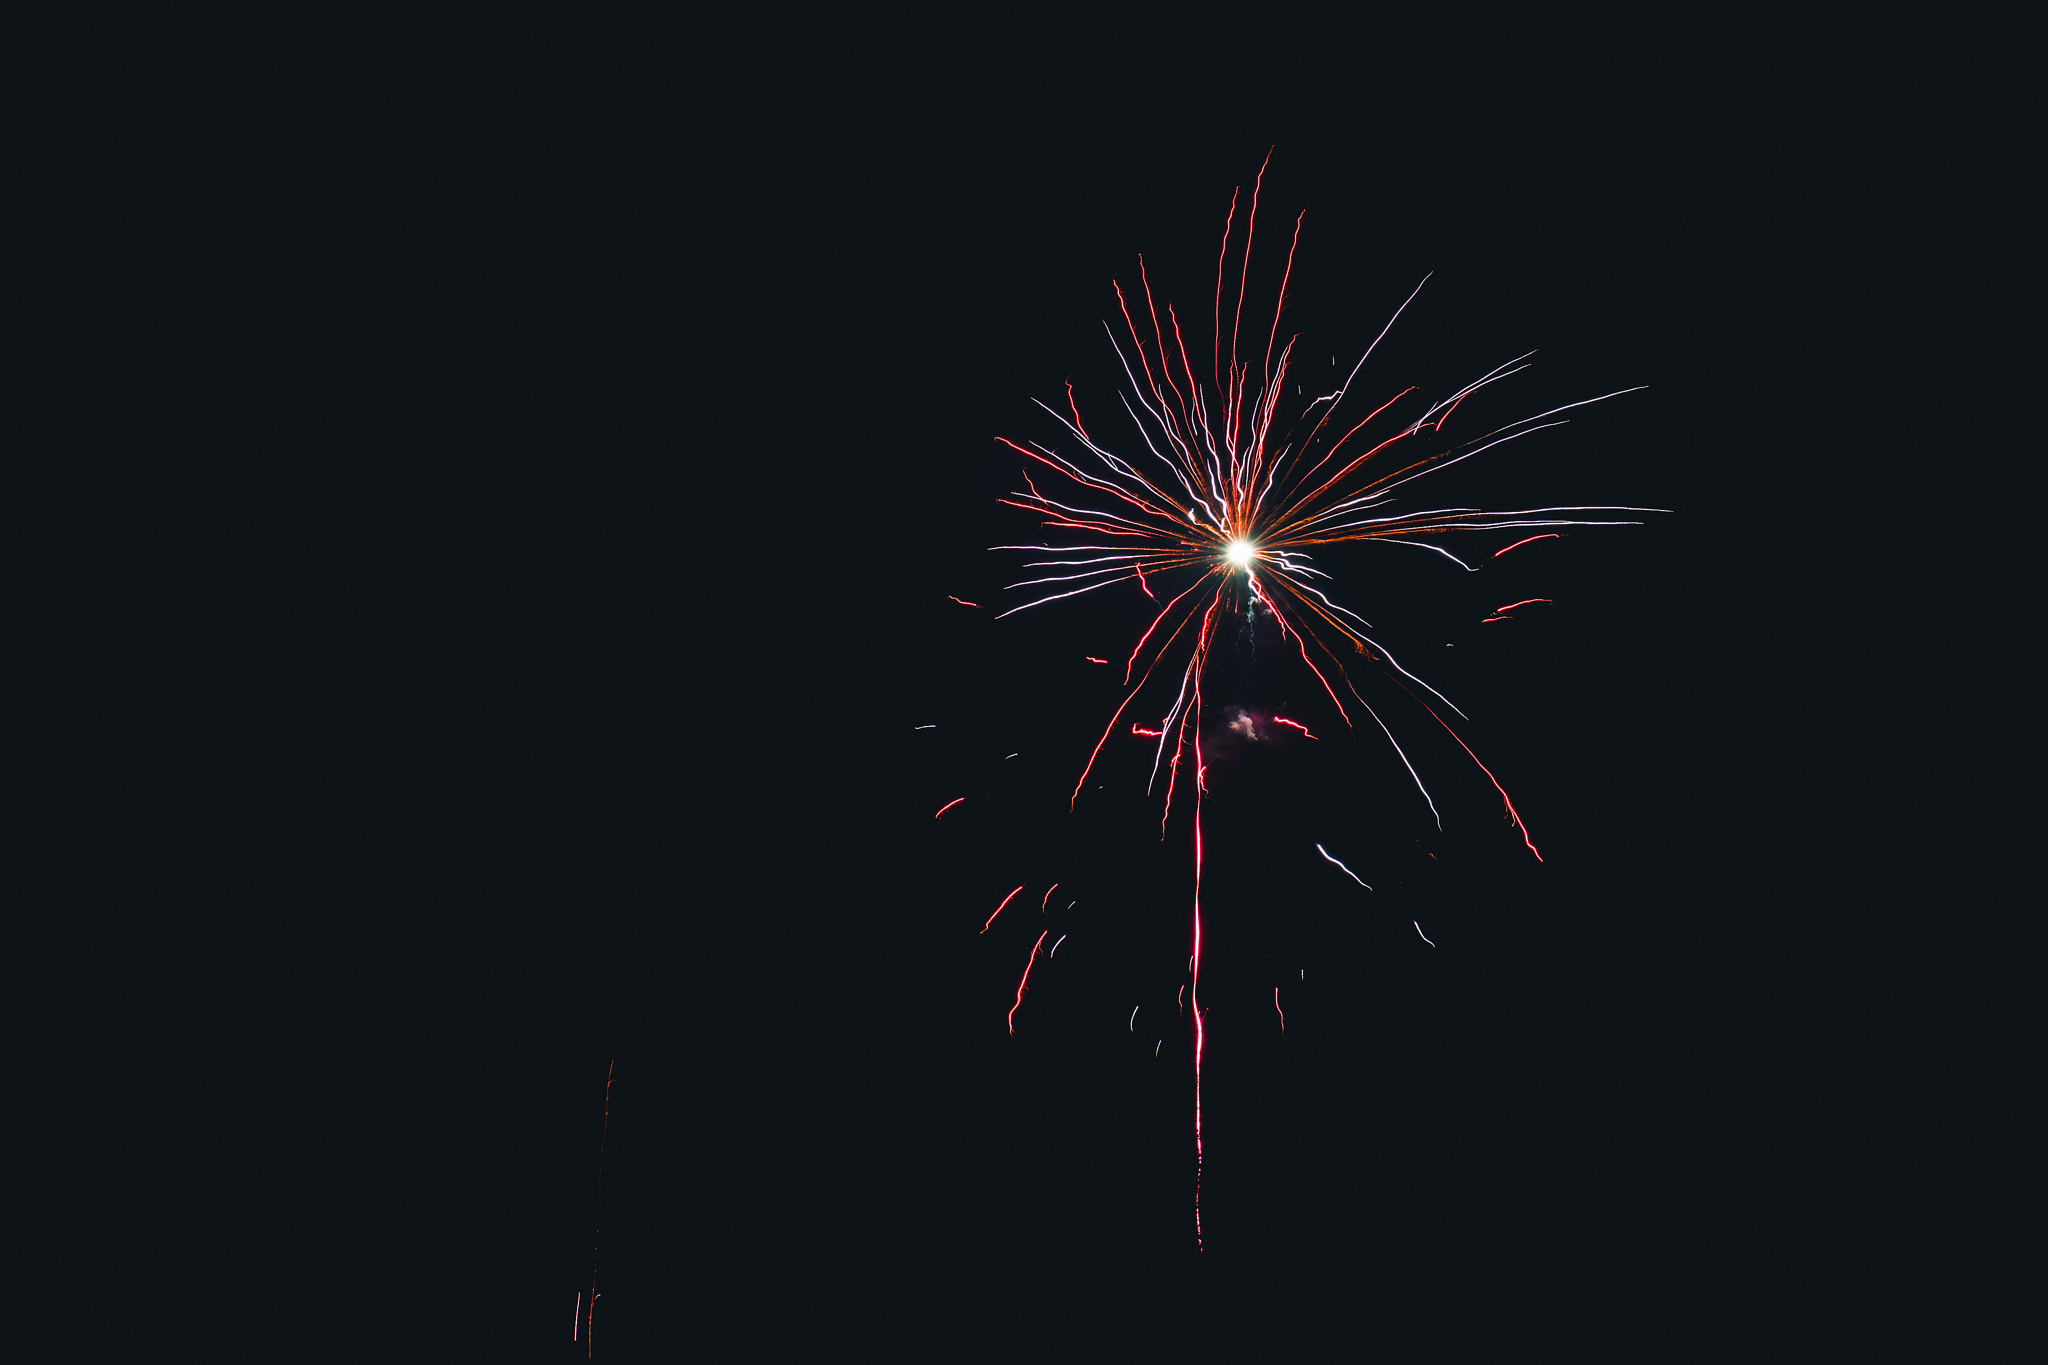 Sony Alpha DSLR-A900 sample photo. Fireworks exploding in the night sky photography